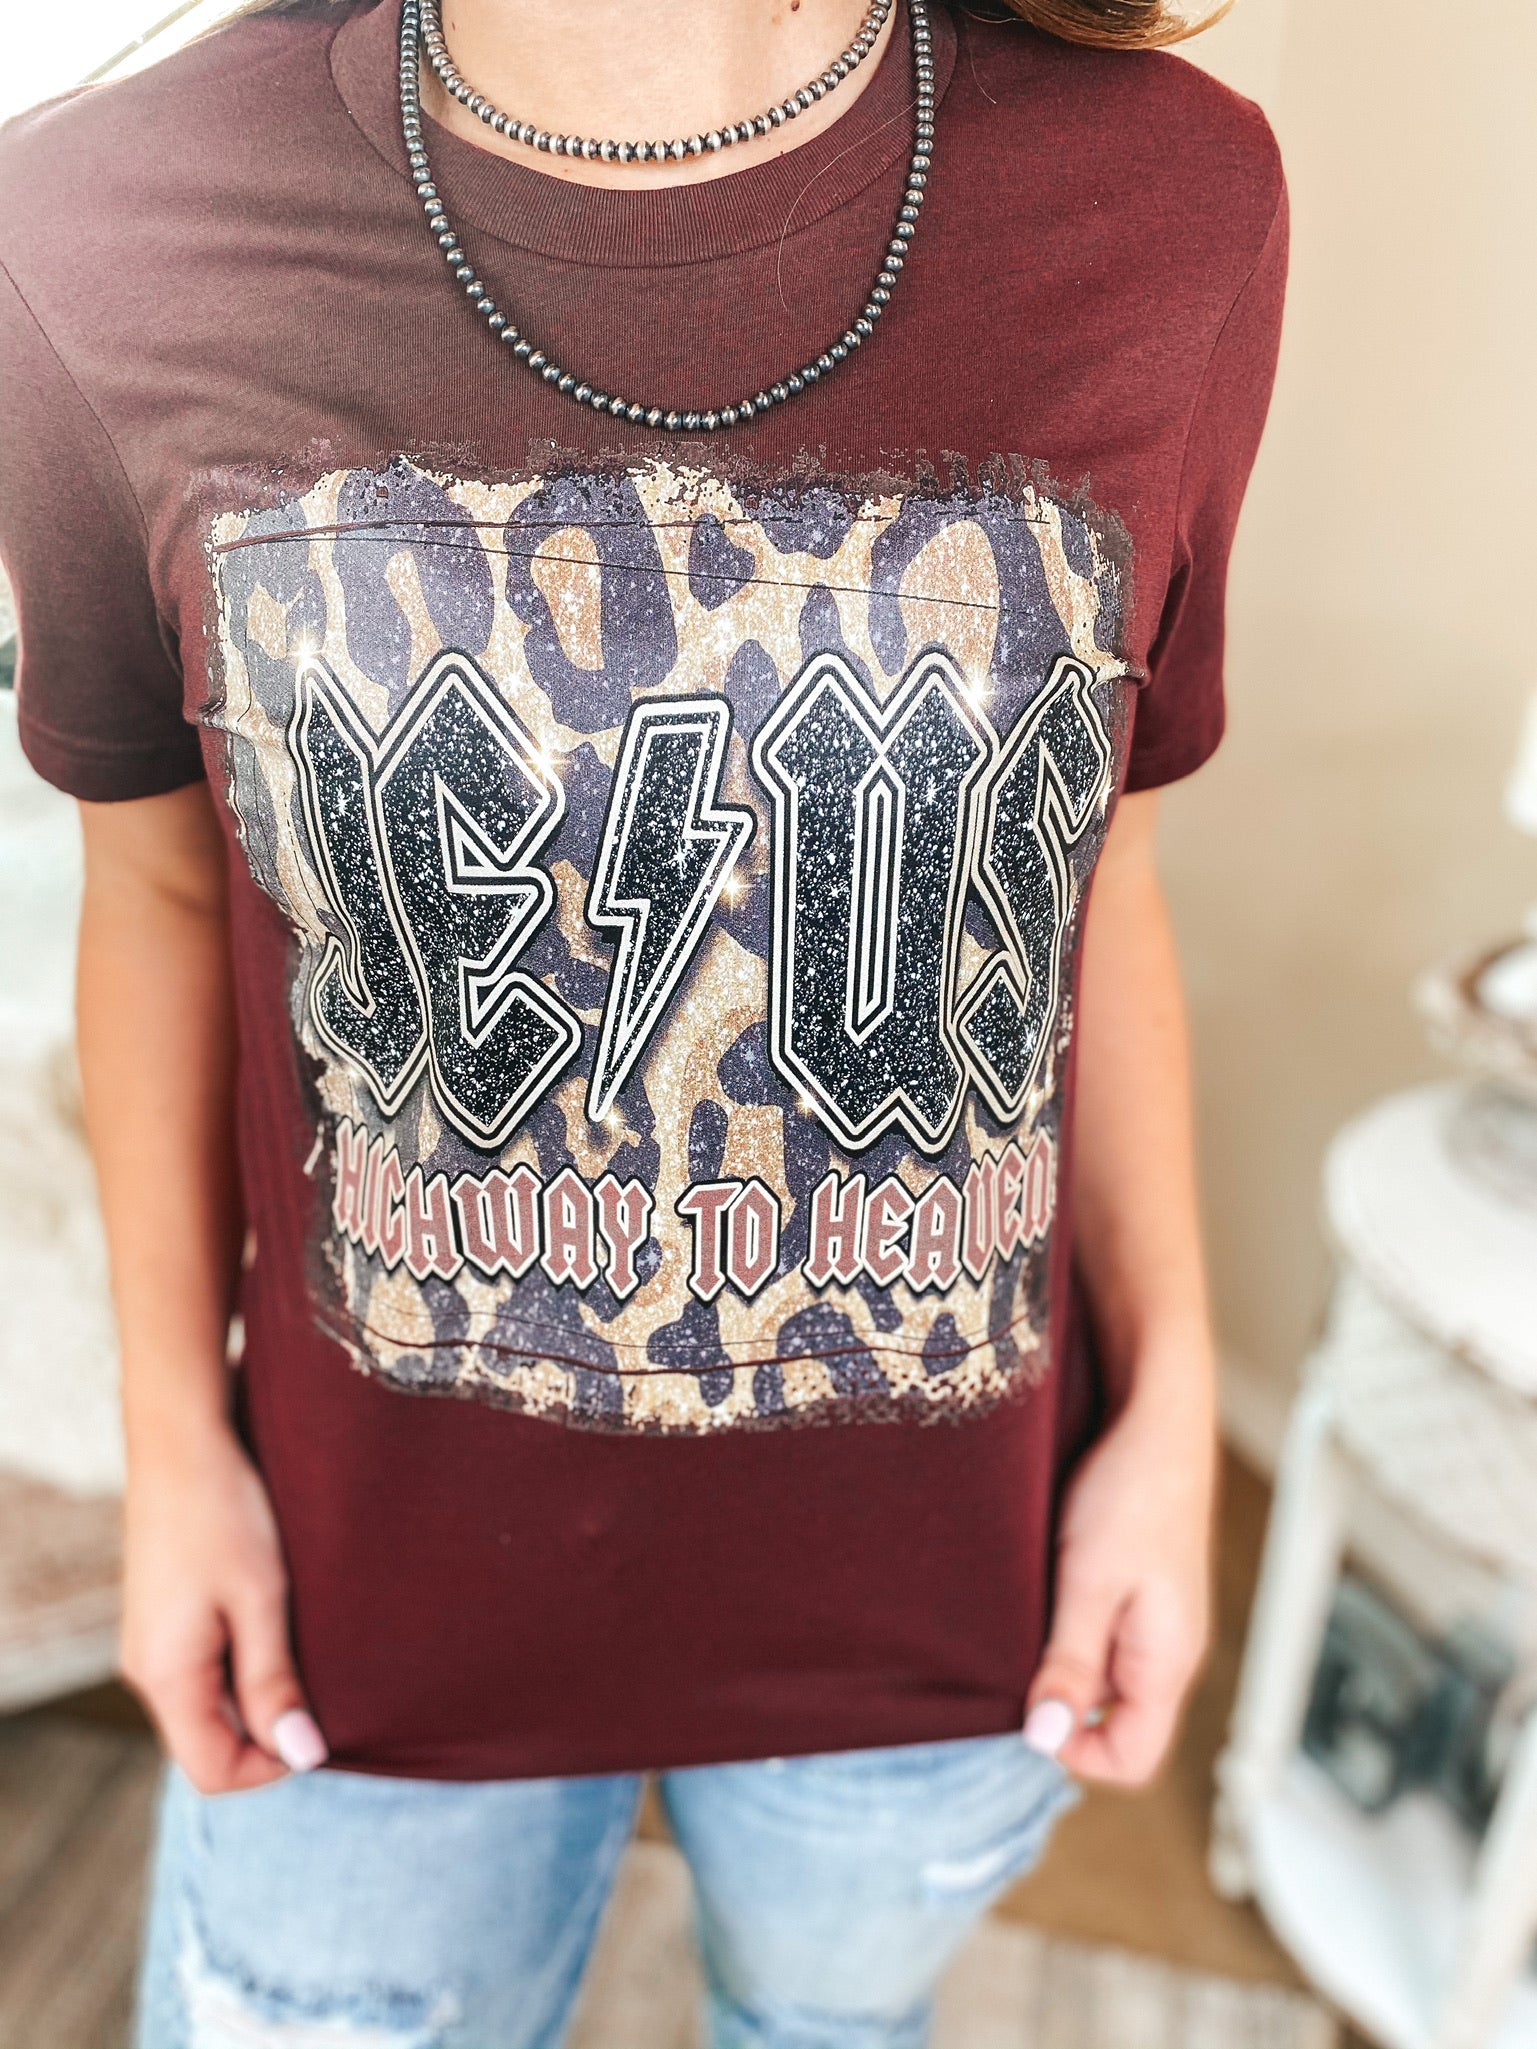 Jesus Is The Highway To Heaven Short Sleeve Graphic Tee in Maroon - Giddy Up Glamour Boutique